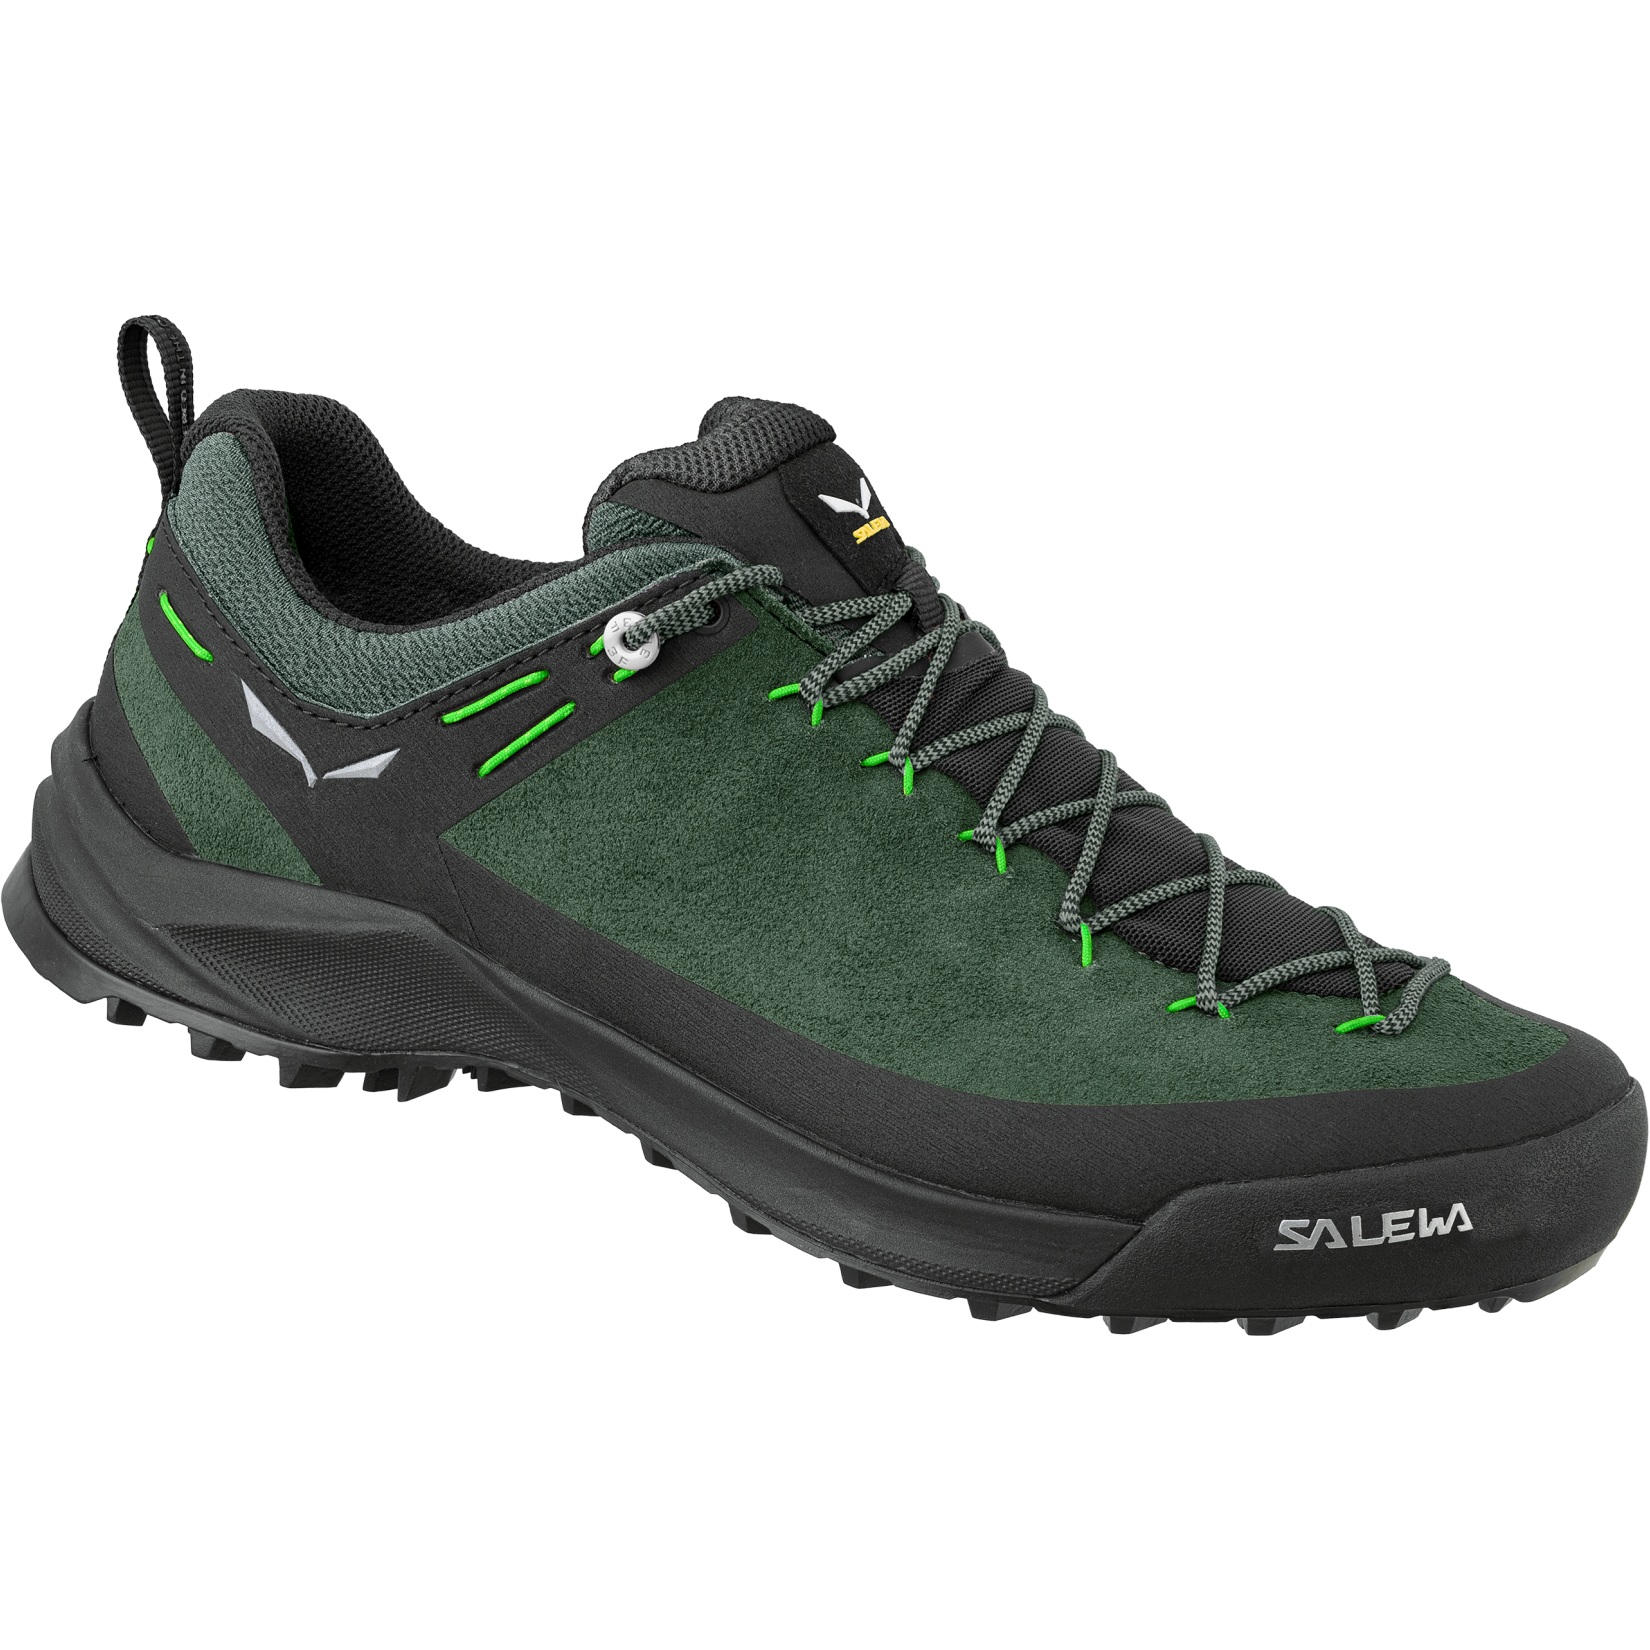 Picture of Salewa Wildfire Leather Approach Shoes - raw green/black 5331